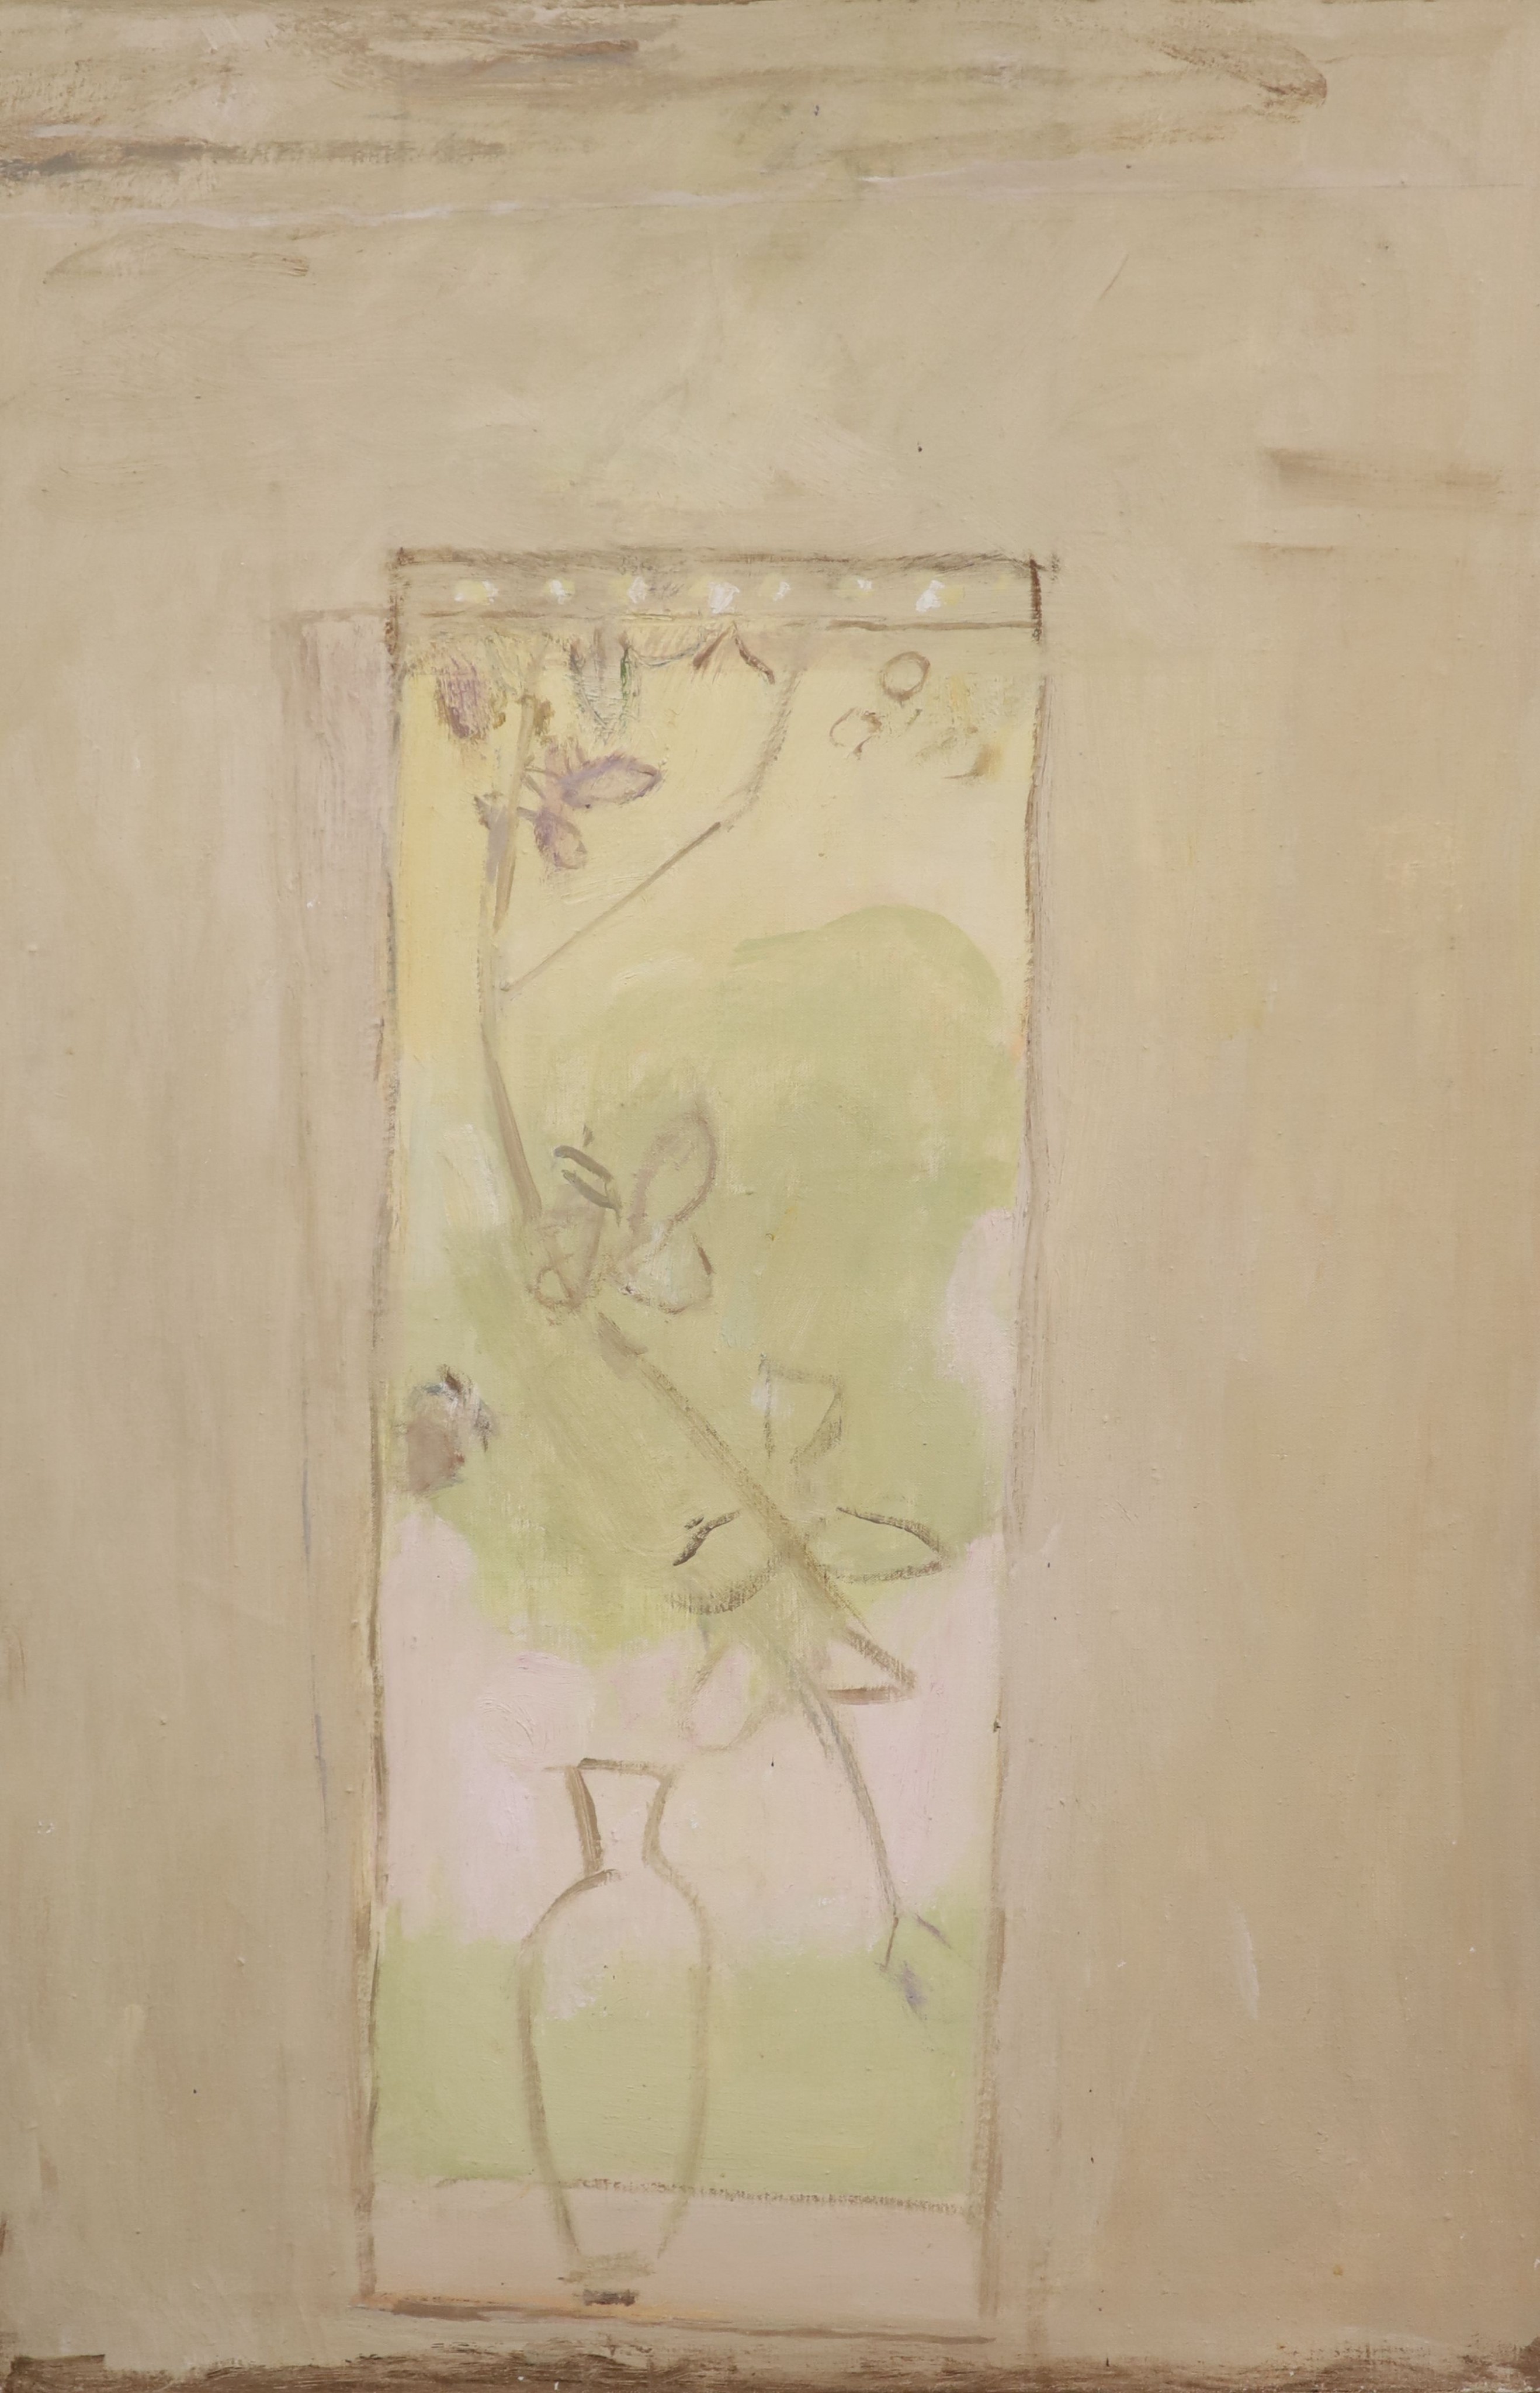 Mary Potter (1900-1981), Window, Oil on canvas, 76 x 50cm.